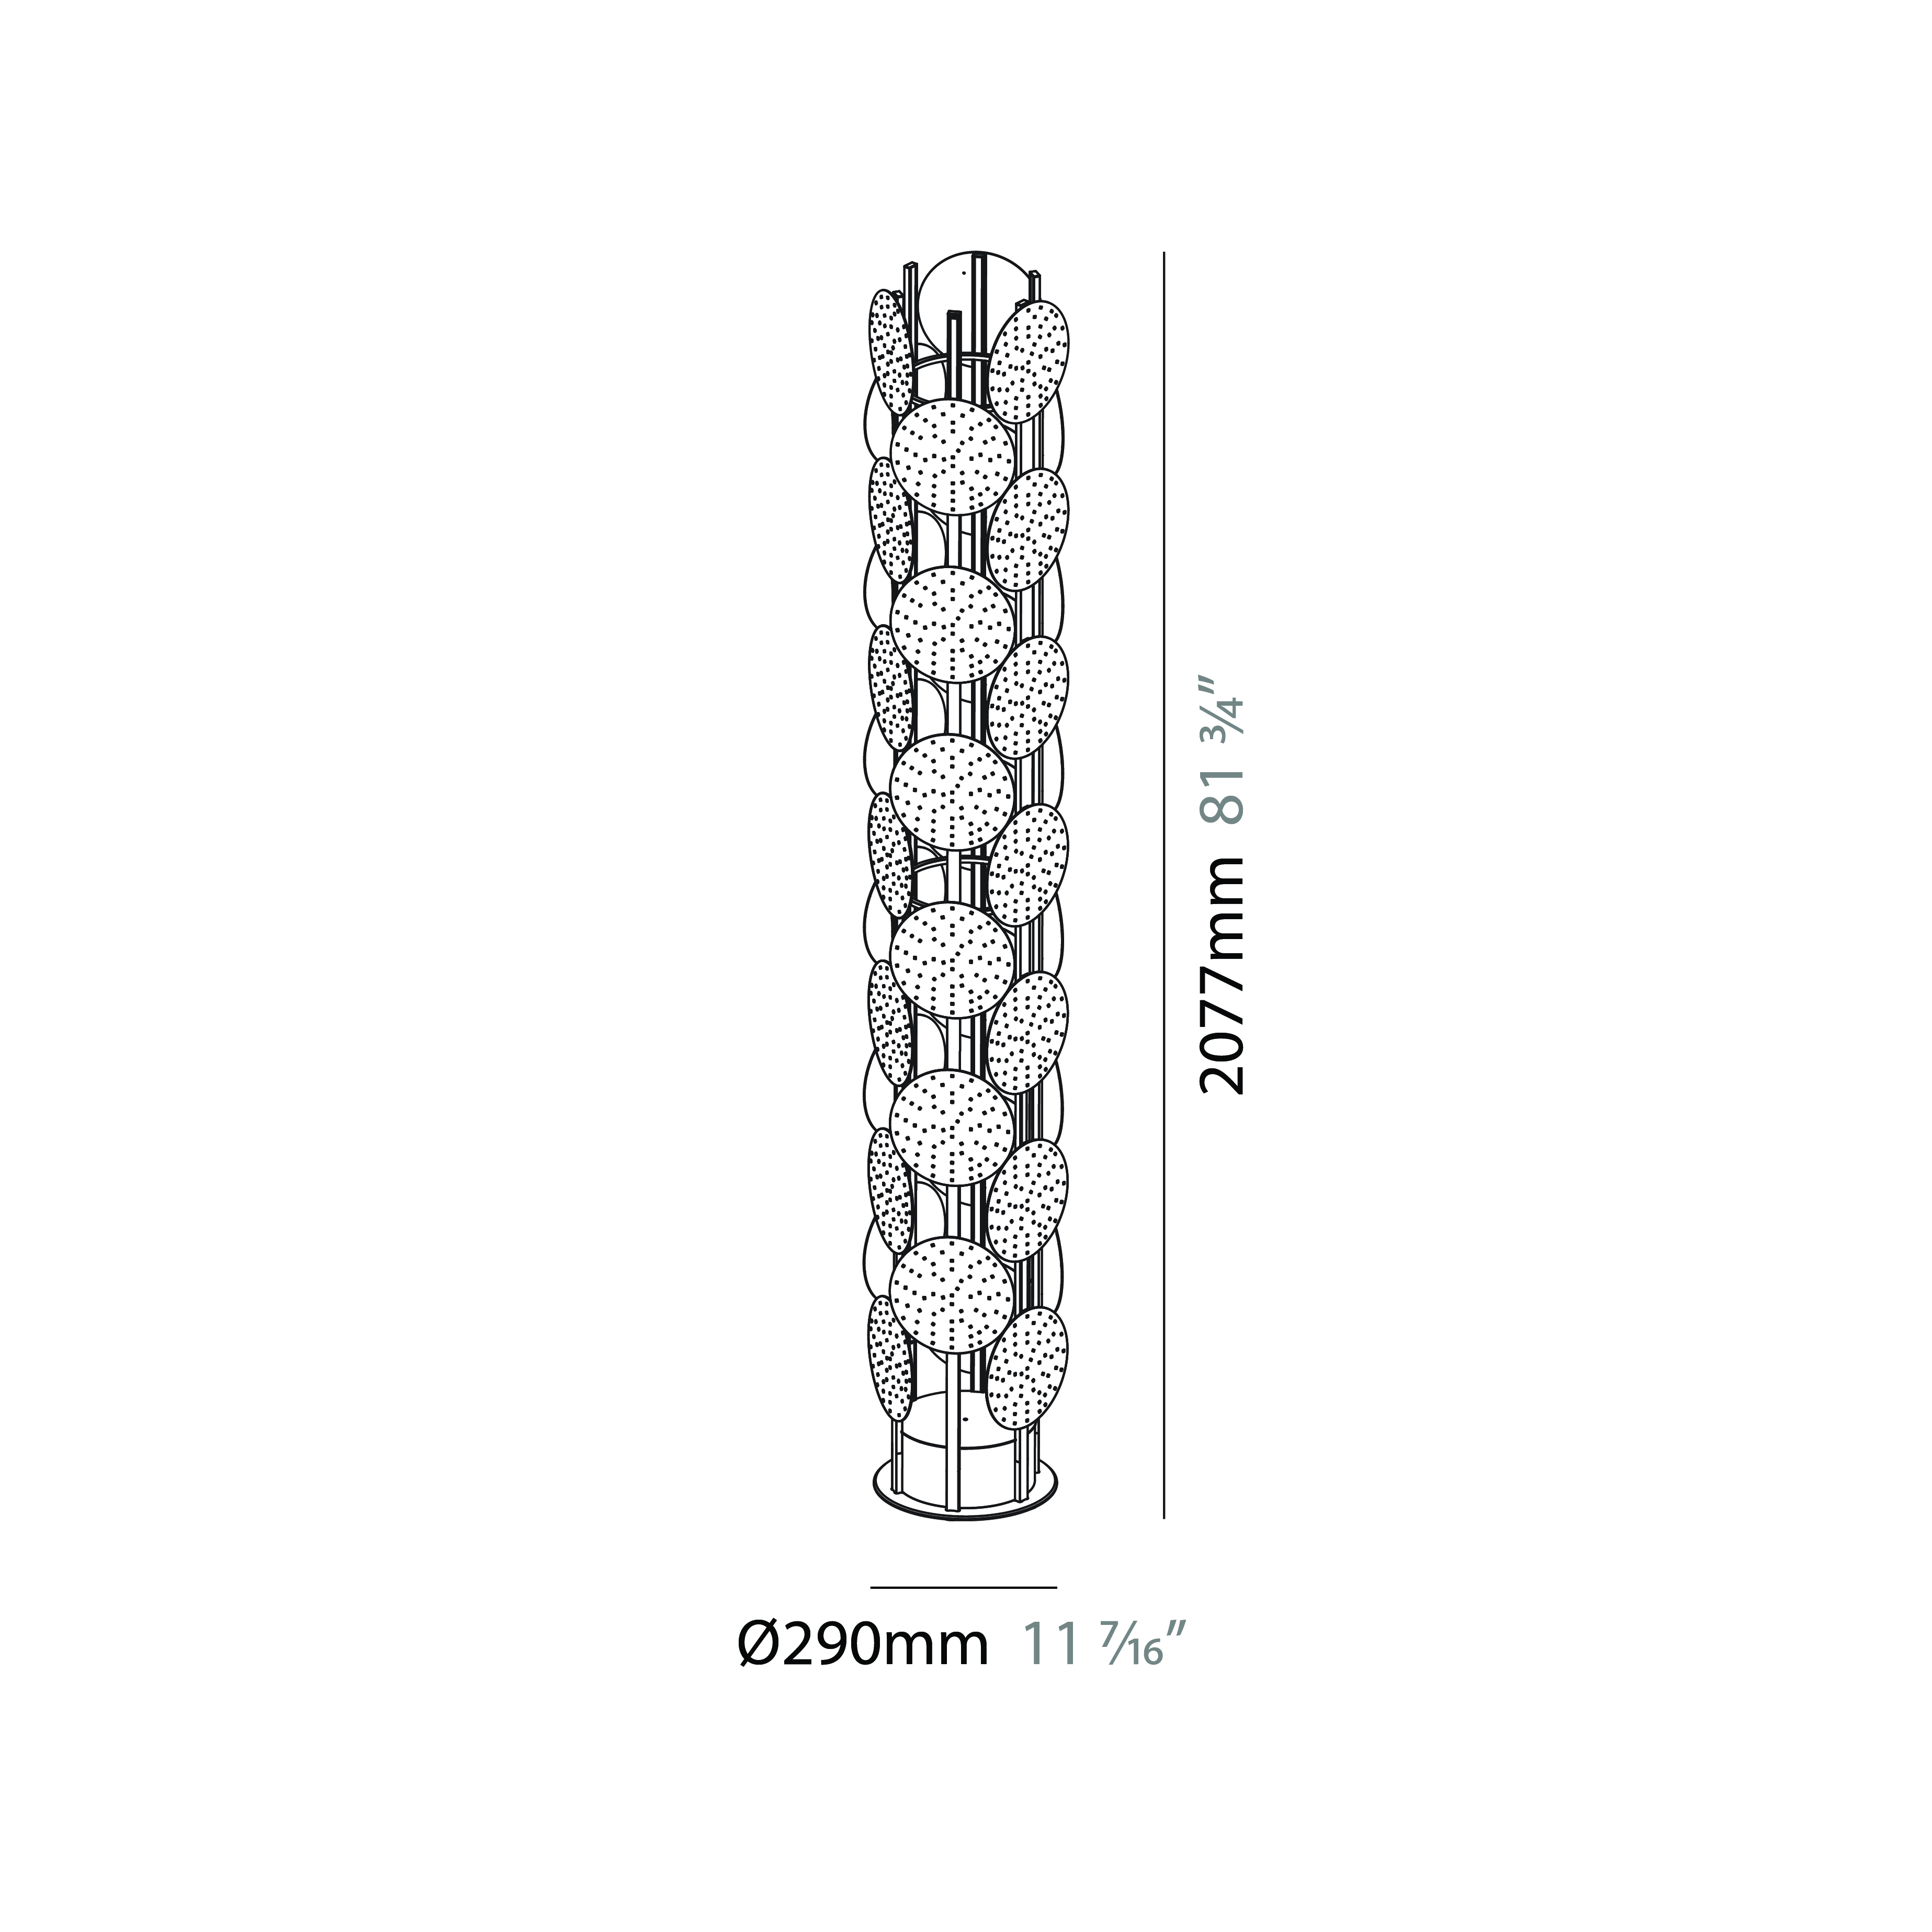 Totem Dot by Prolicht – 11 13/16″ x 82 11/16″ Portable, Ambient offers LED lighting solutions | Zaneen Architectural / Line art